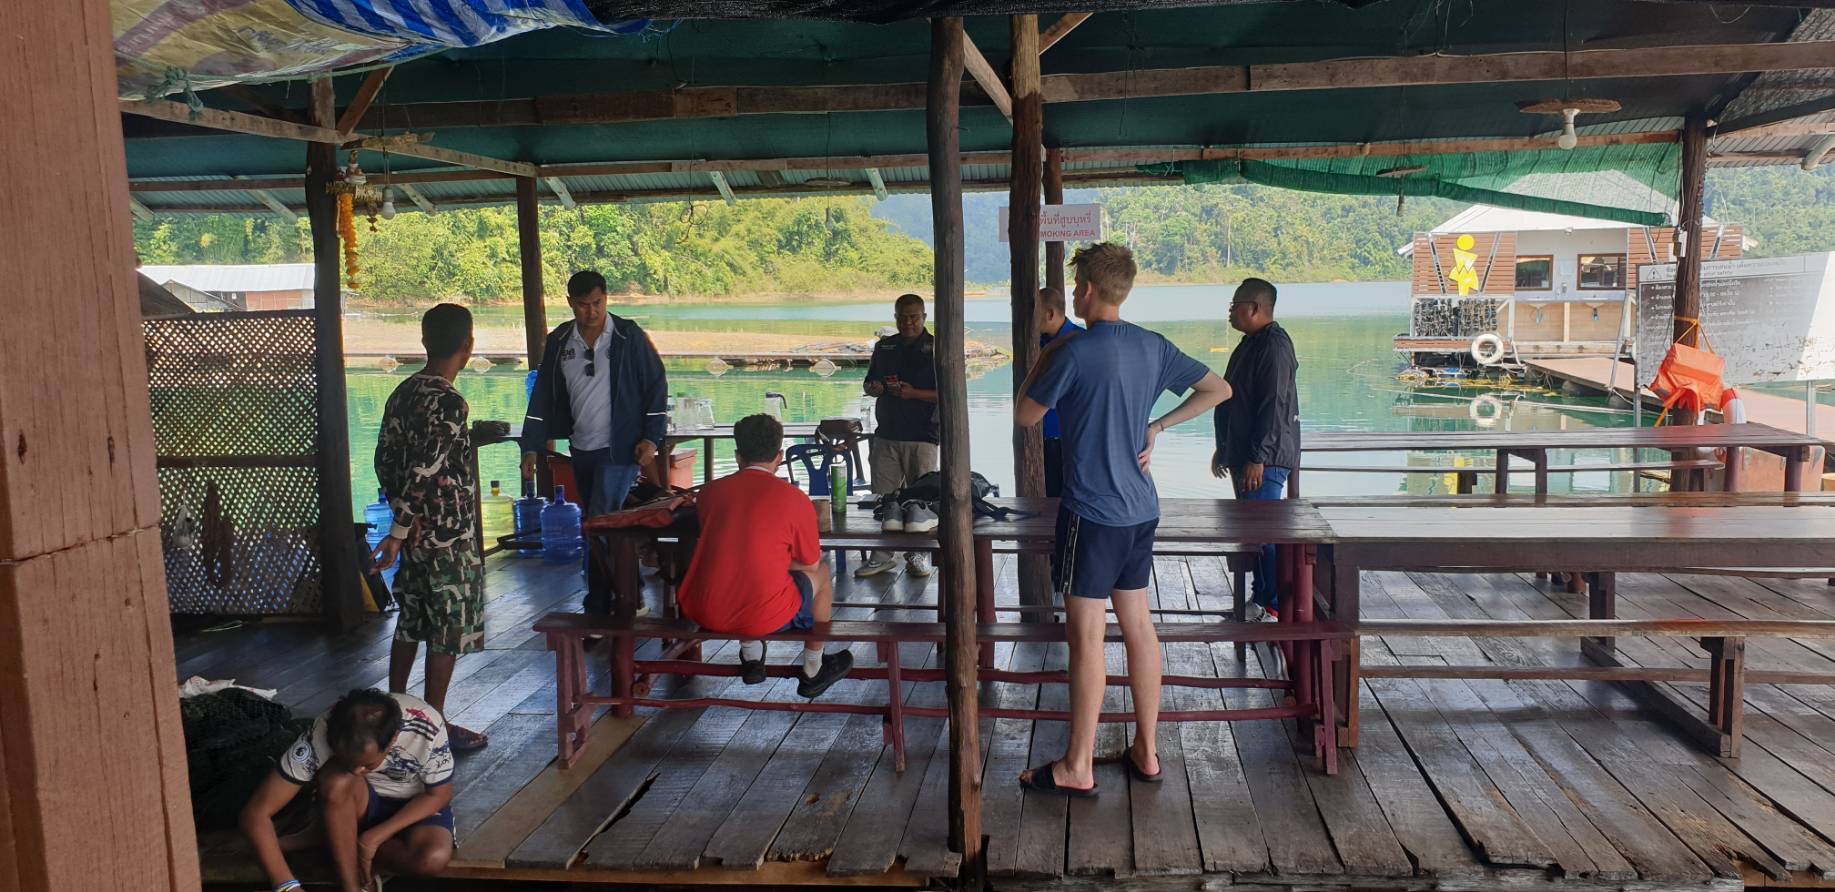 Surat Thani Officers Searches for the British Tourist With Sonar